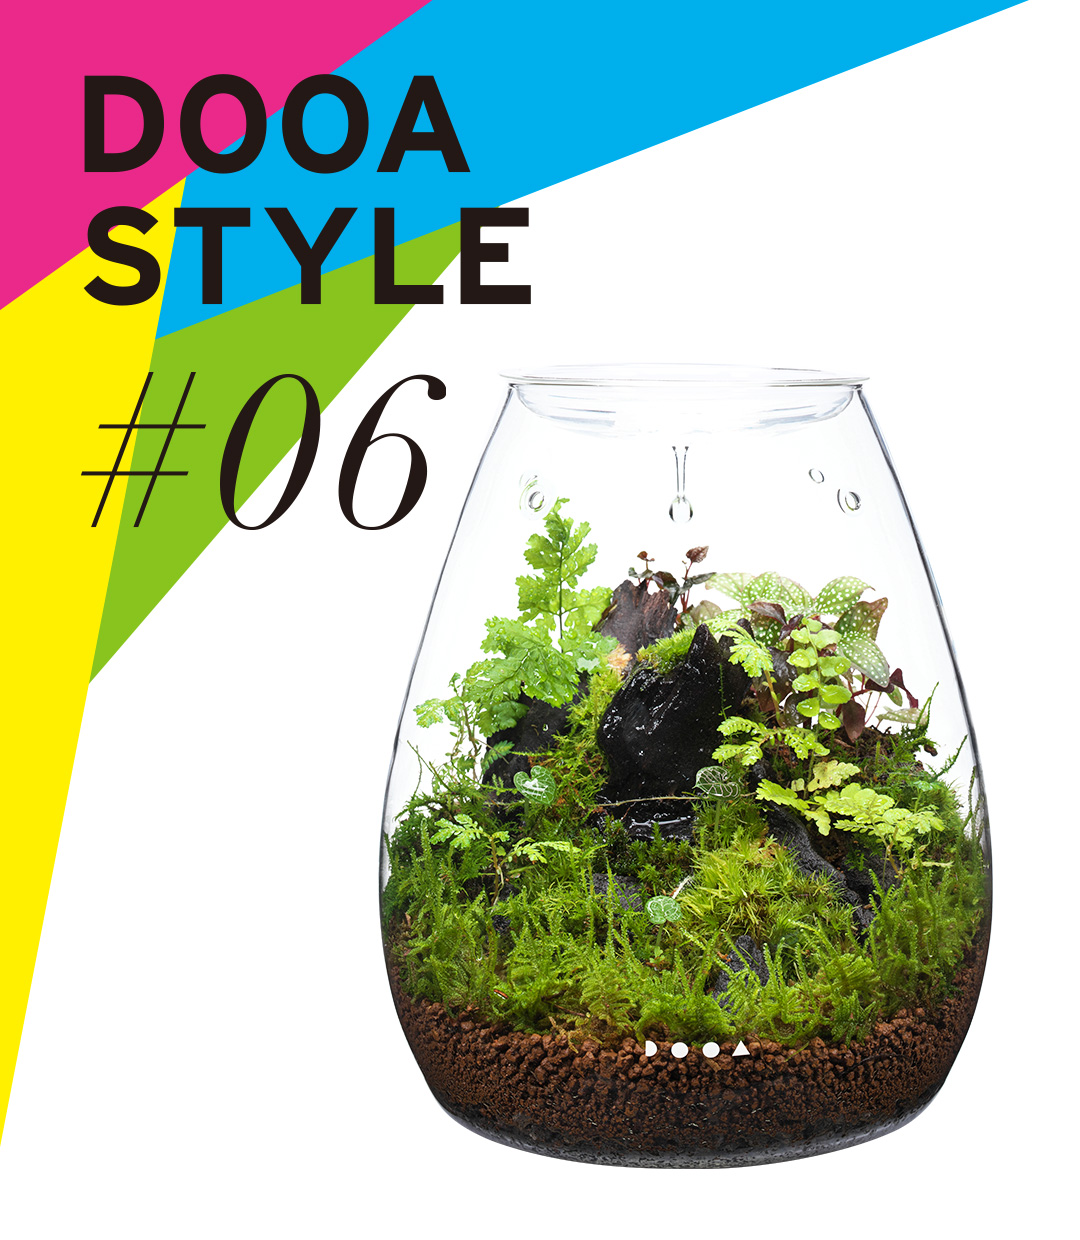 DOOA STYLE #6  ‘The needs of tiny living things growing in a small space’